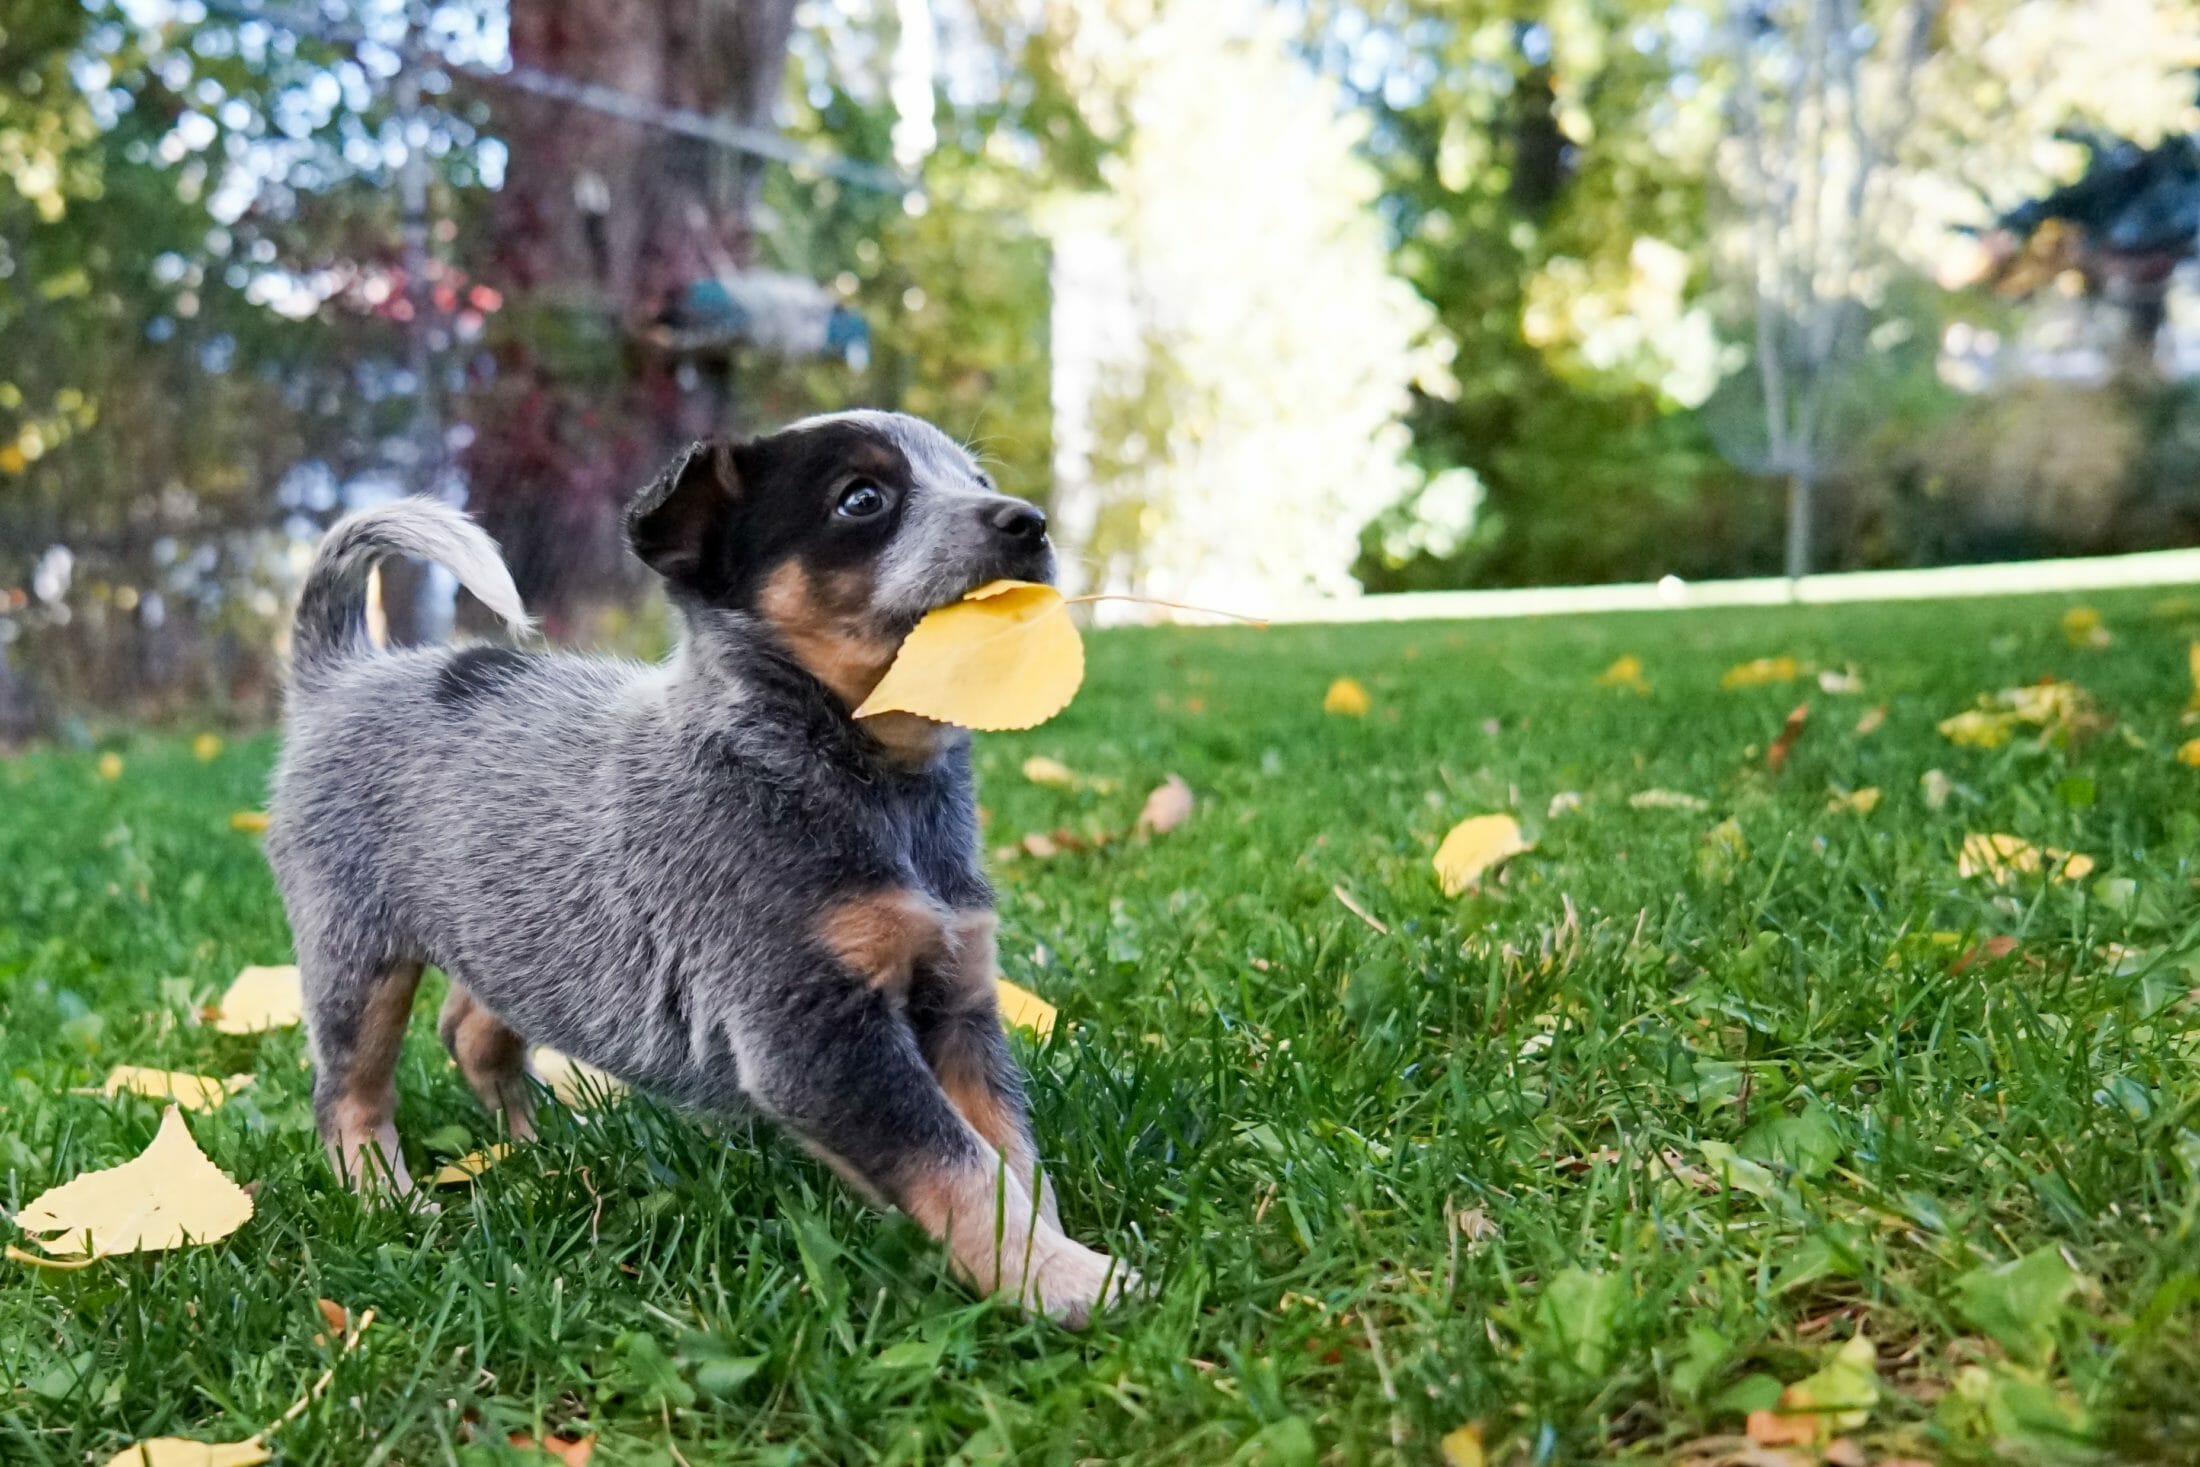 Dog running free on a lawn